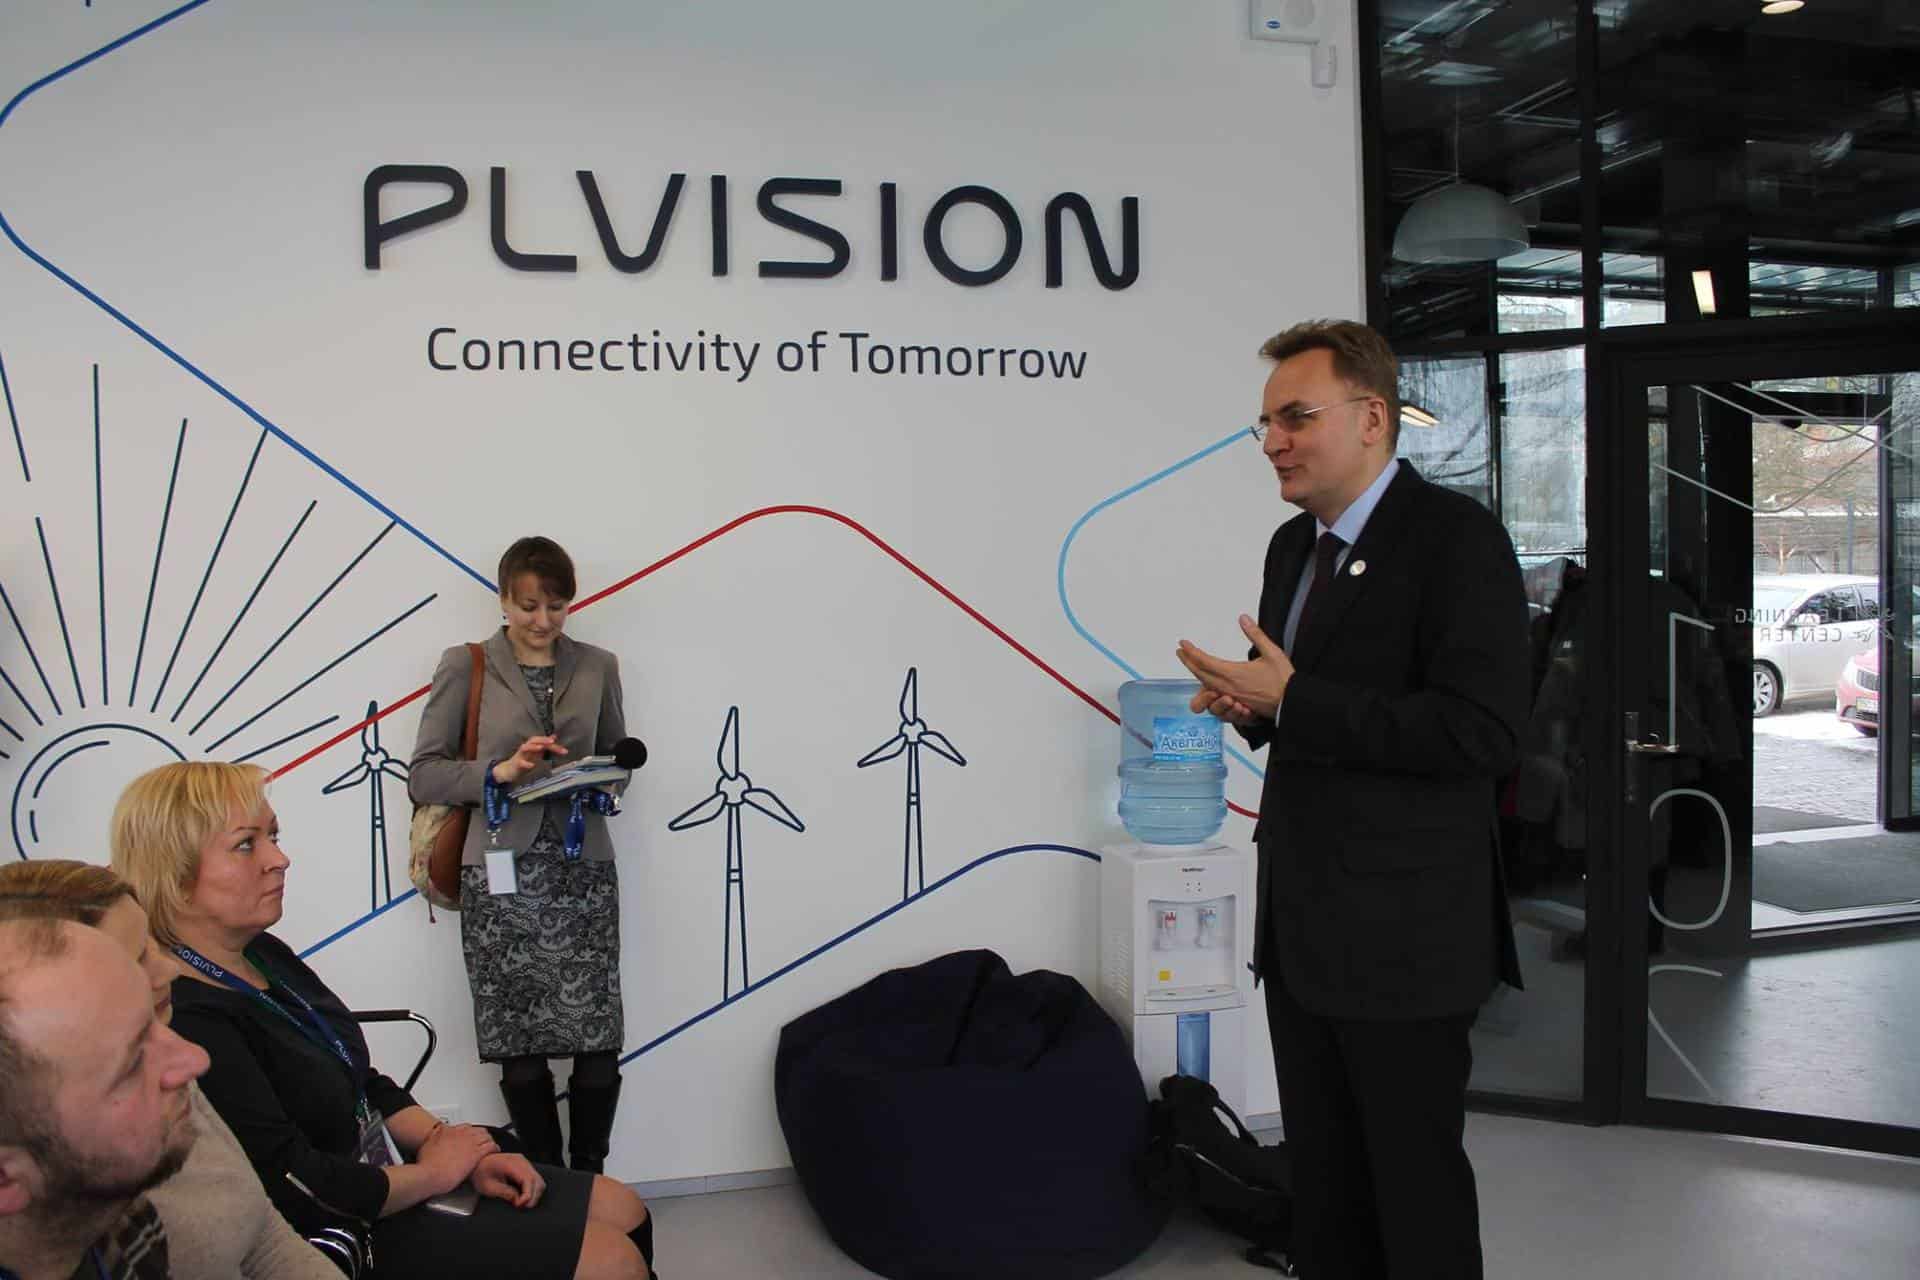 PLVision joins the Lviv Electronic Education Conference